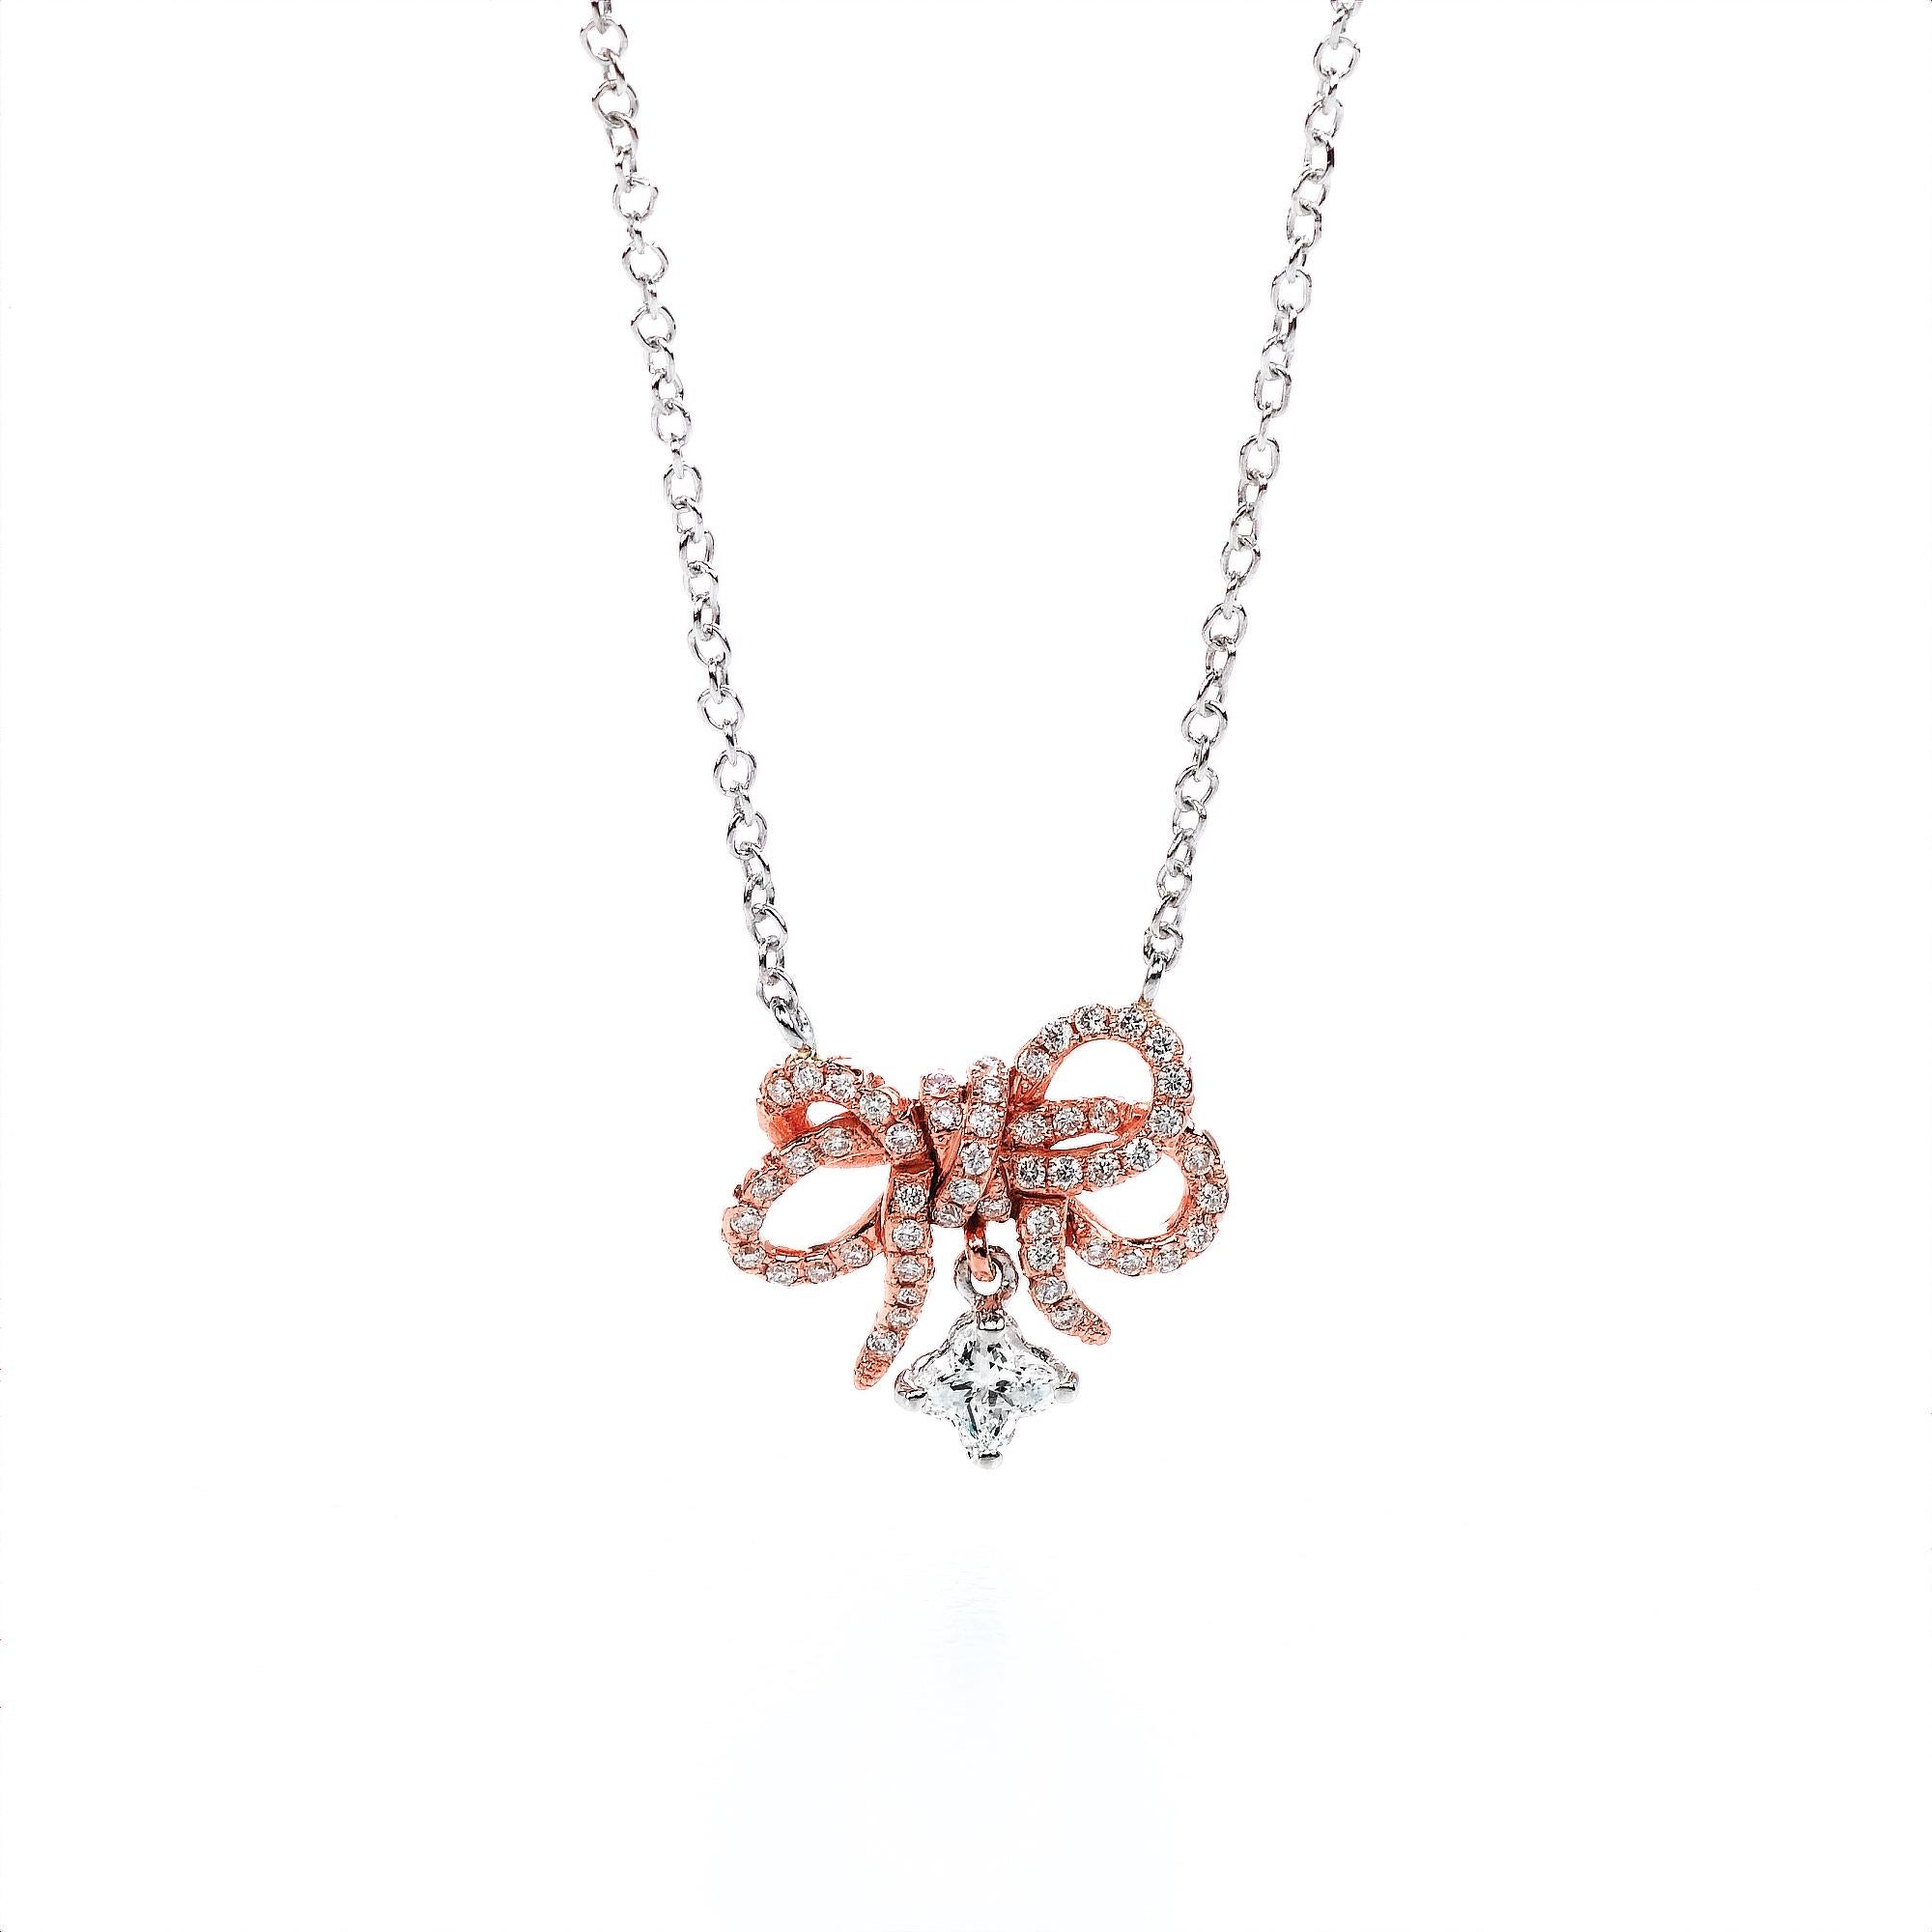 18KT white and rose gold bouquet  diamond flower necklace.  .1 LILY CUT ® flower shape diamond H color VS SI clarity  0.18 cts . additional 0.28 ct round diamond accent .Overall size 17 inch necklace with a link to make 16 inch .